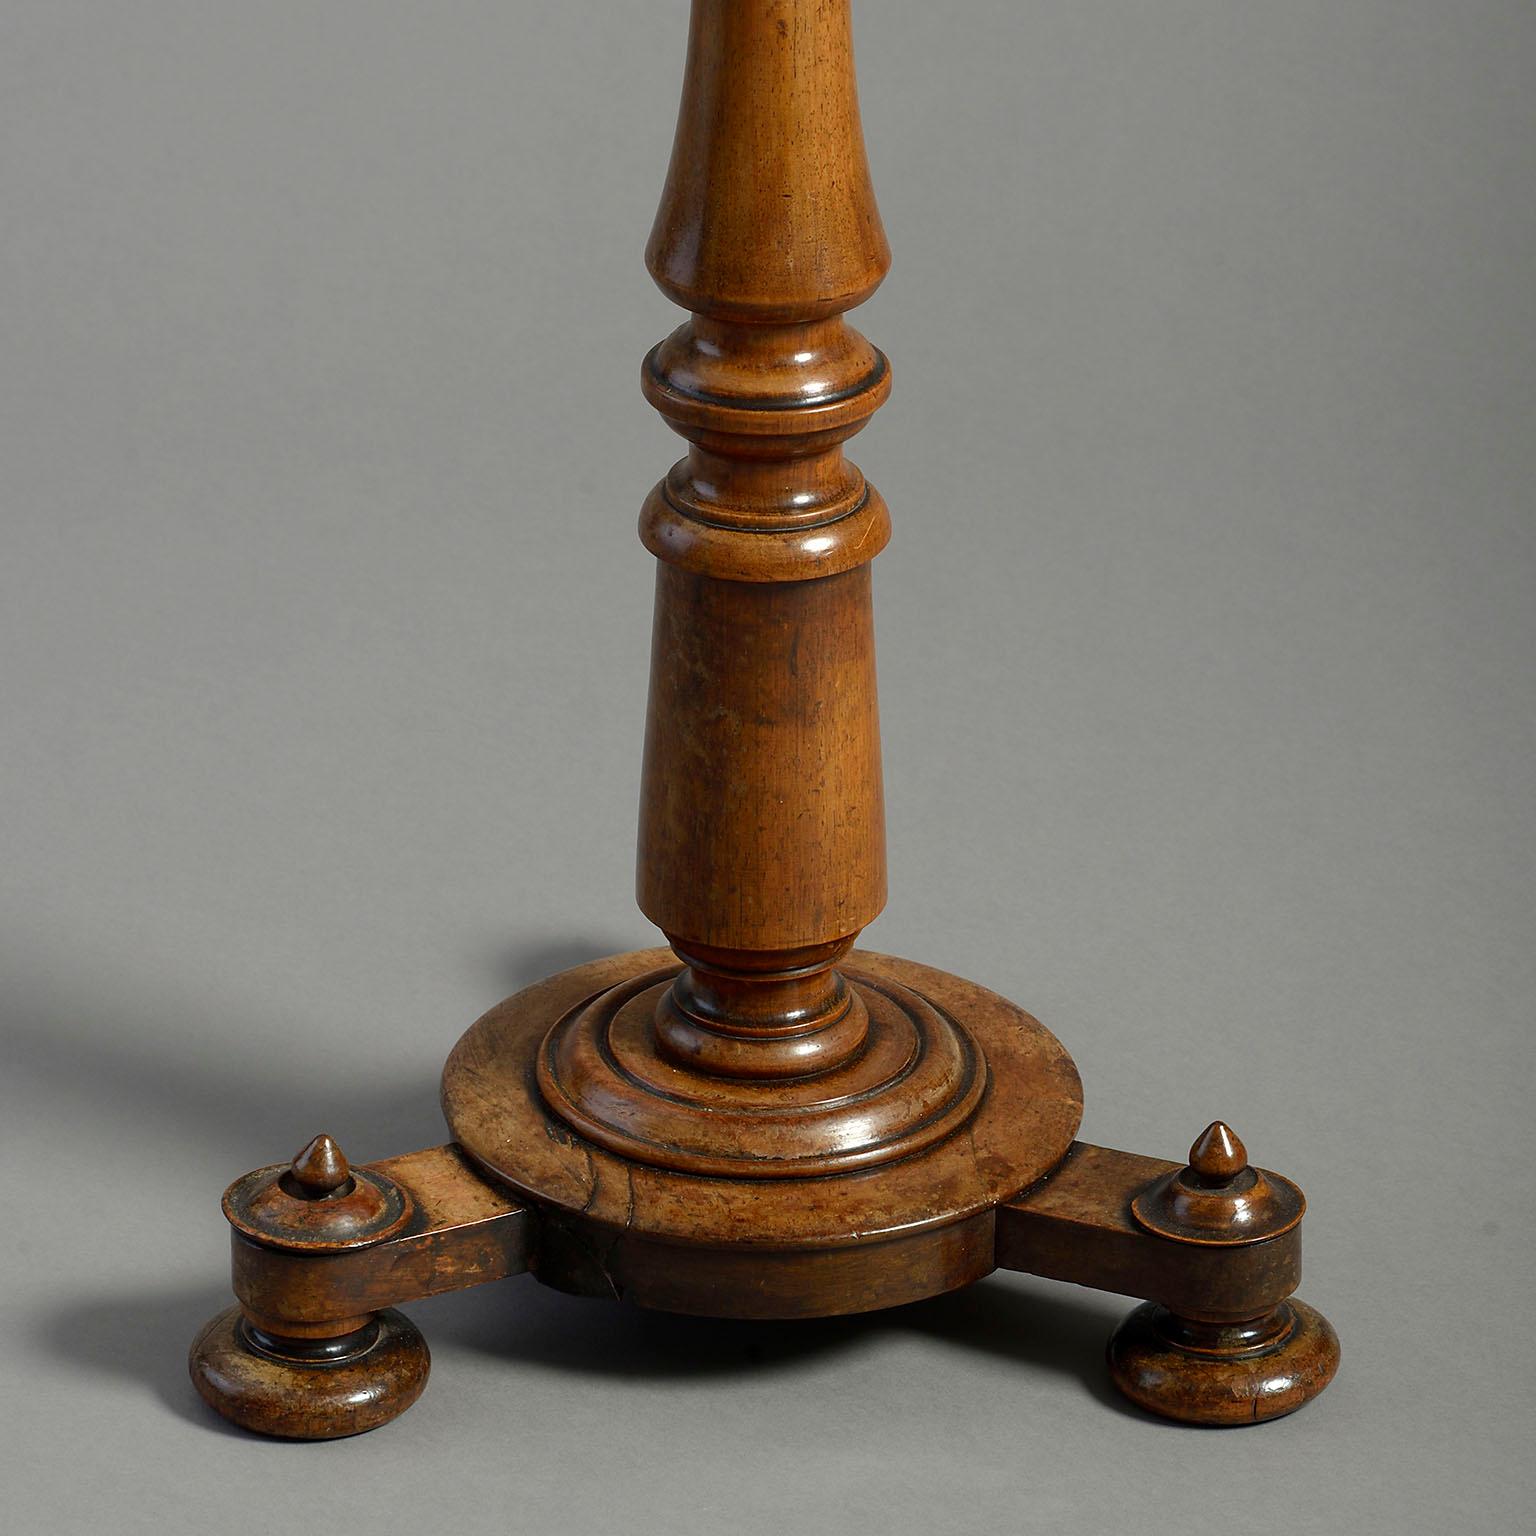 Turned Mid-19th Century Victorian Walnut Occasional Table